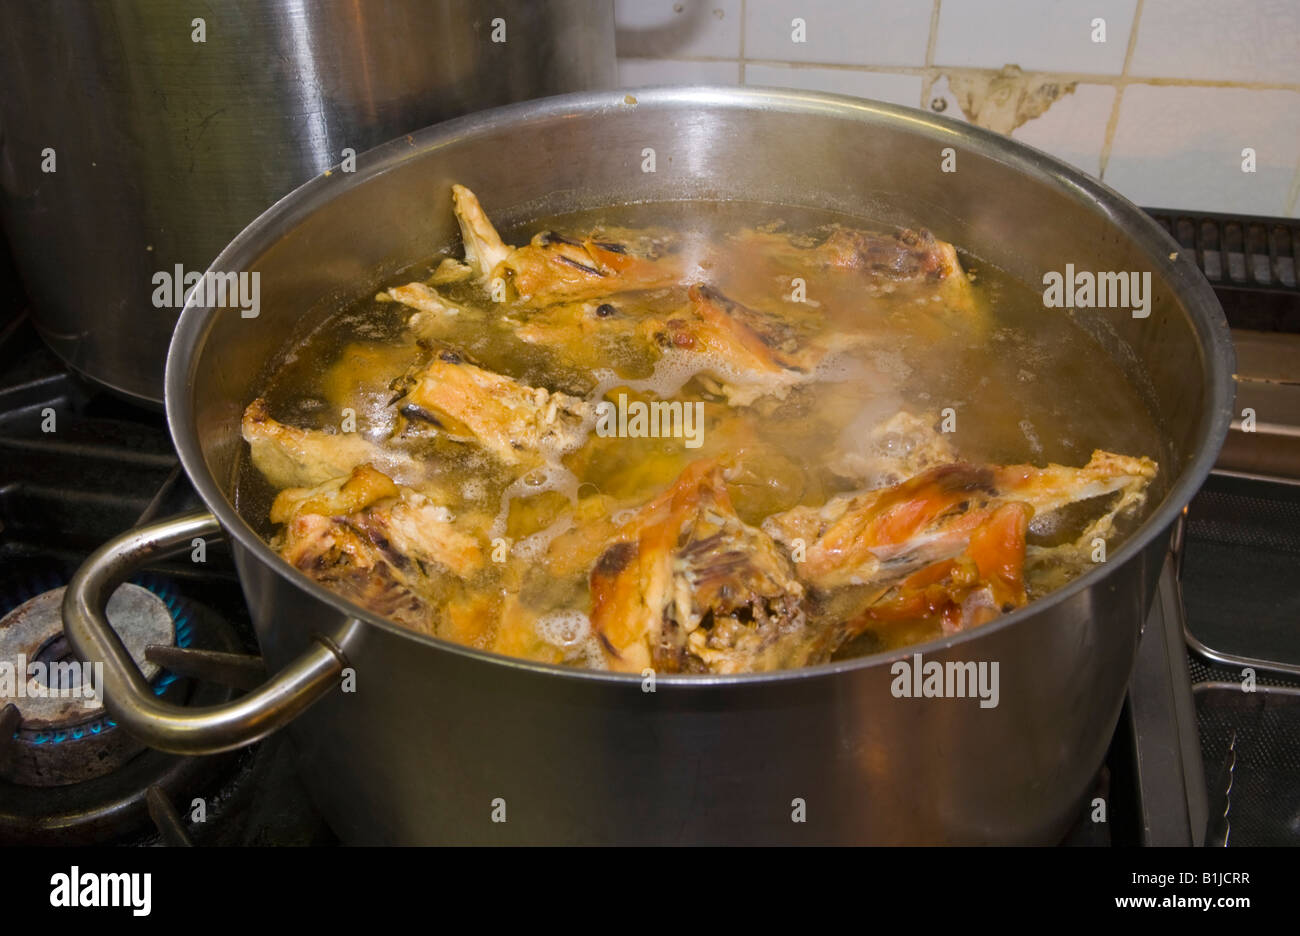 Pan of stock simmering on the stove at The Walnut Tree Restaurant Llanddewi Skirrid Abergavenny Monmouthshire Wales UK Stock Photo